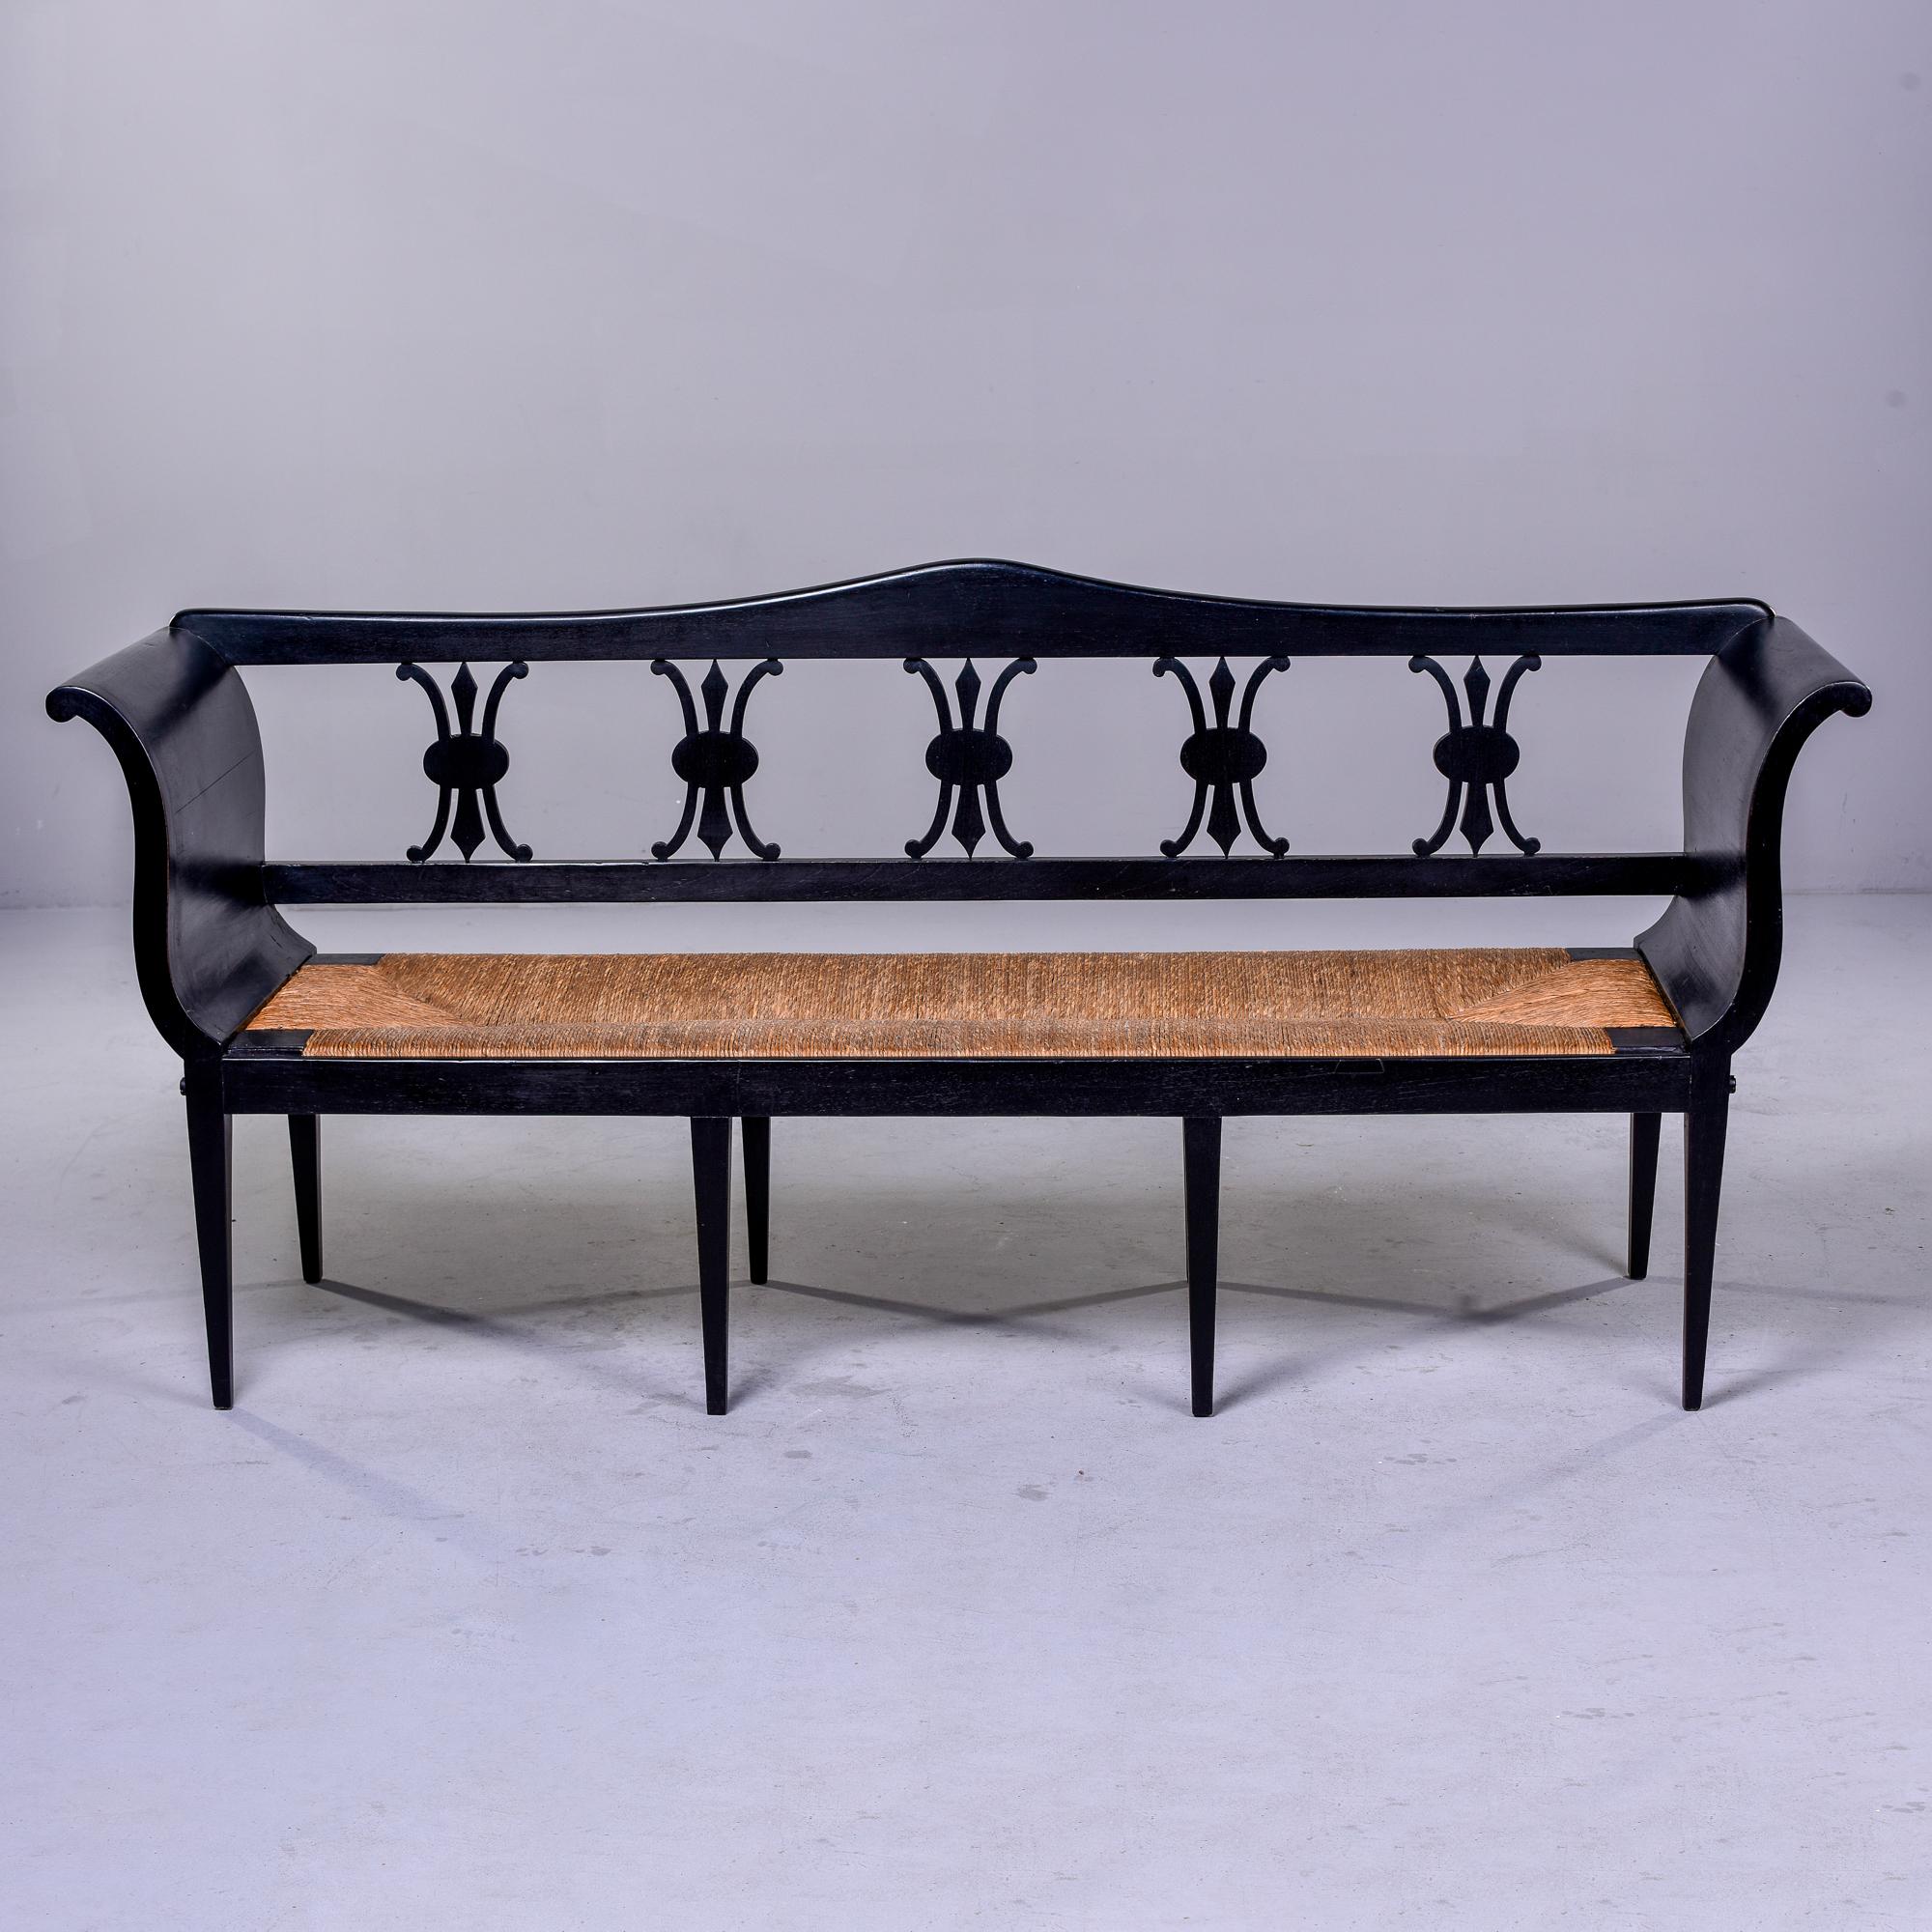 Circa 1920s French bench has eight legs, high curved sides, decorative carved backrest and woven rush seat. New black ebonised finish. Unknown maker. Very good antique condition with minor scattered wear to surfaces. 

Arm Height: 32.5” Seat